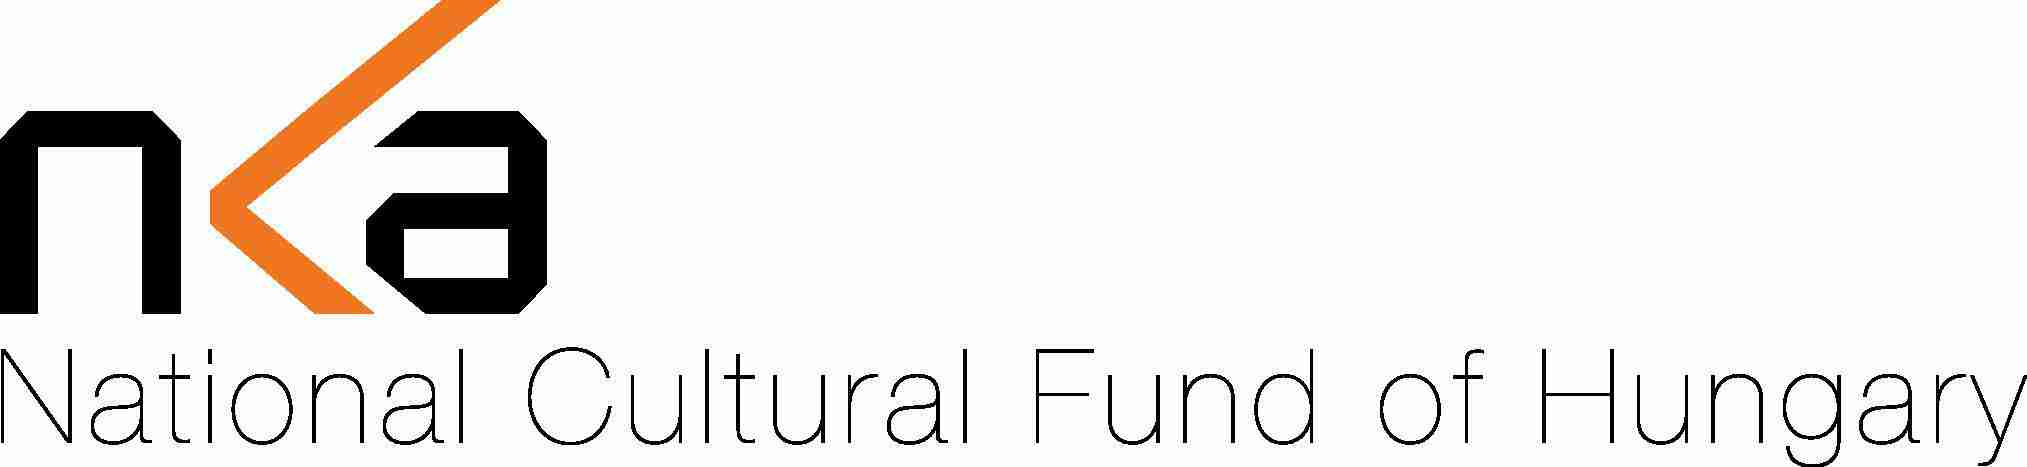 National Cultural Fund of Hungary